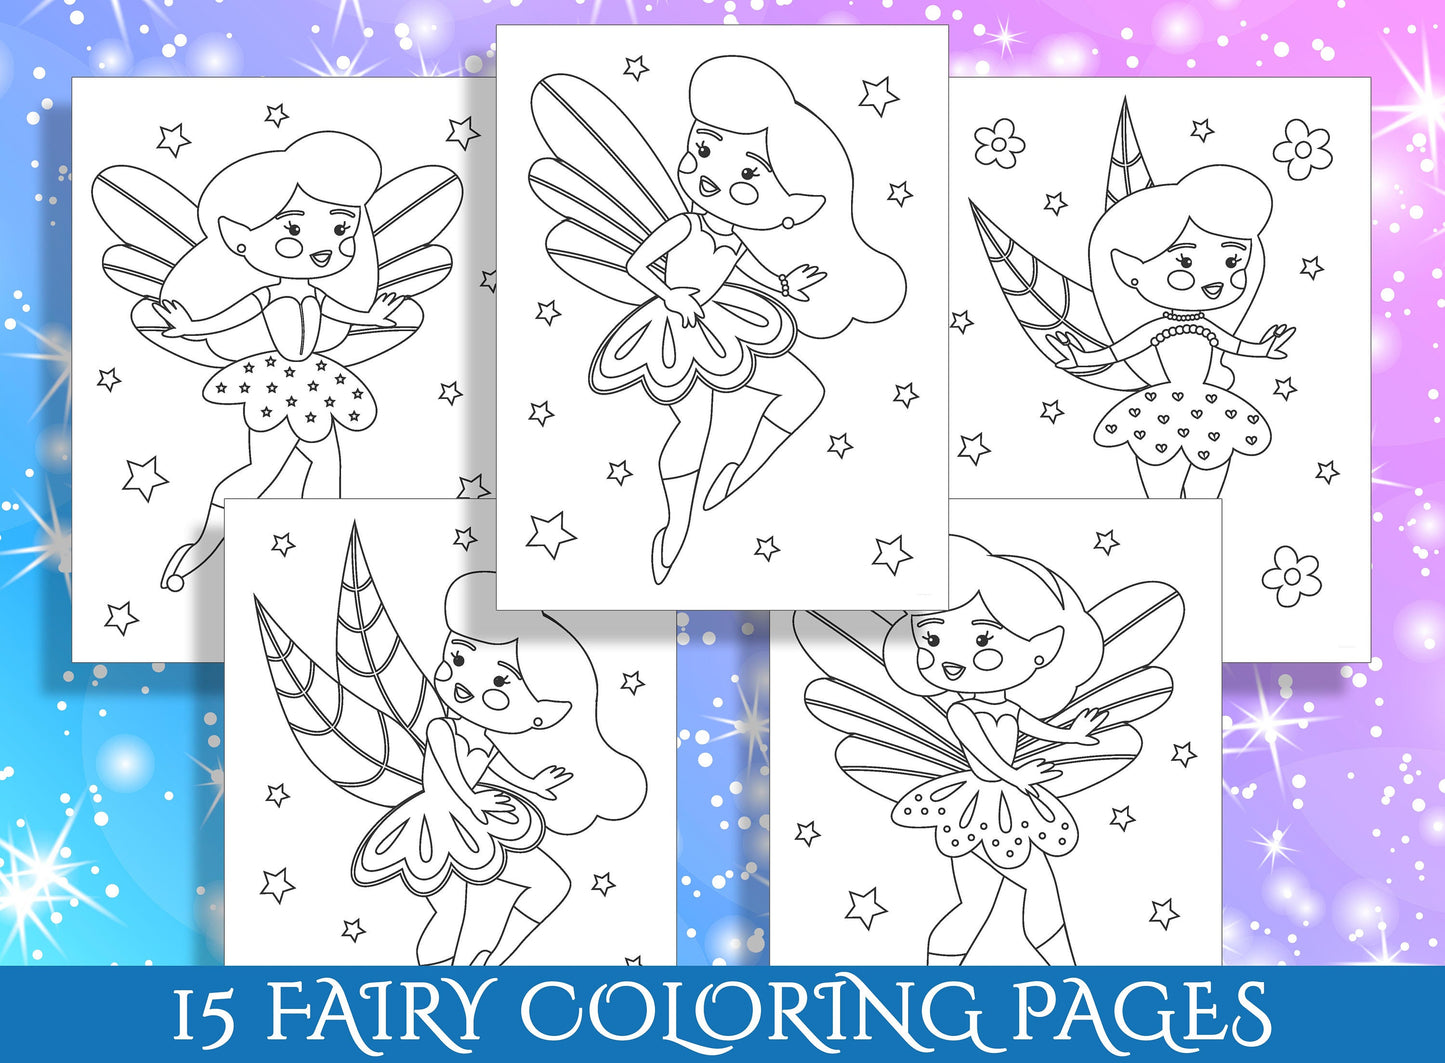 Fairy Fun for Little Ones: 15 Magical Coloring Pages for Preschool and Kindergarten Kids - PDF File, Instant Download